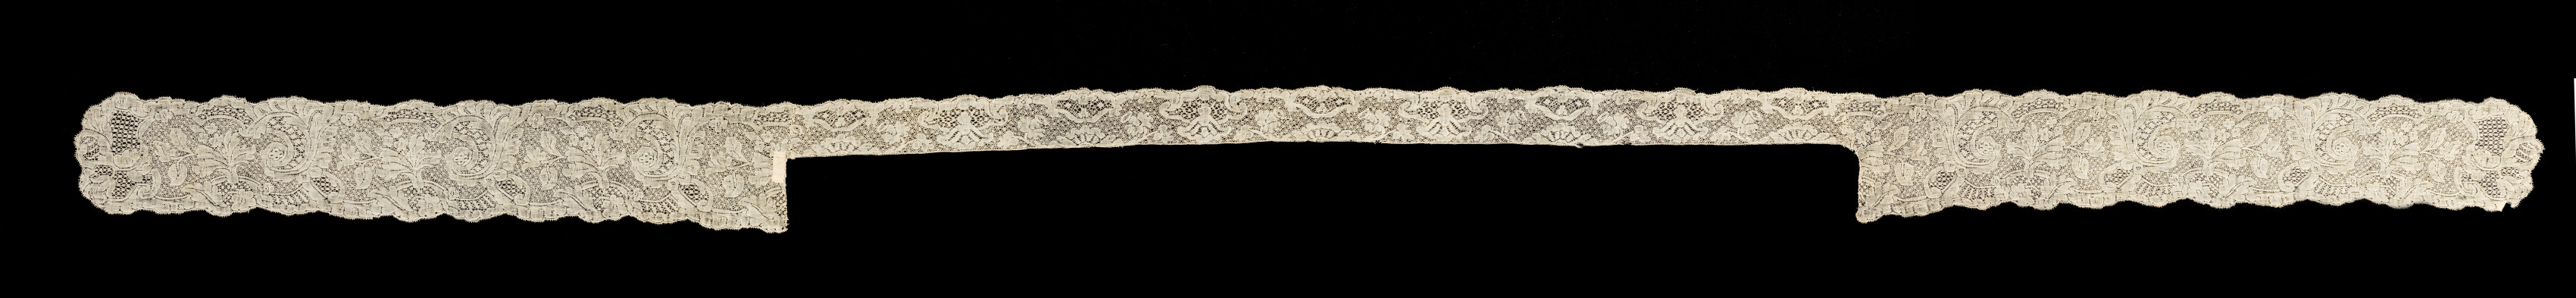 Bobbin Lace Lappets and Edging for Cap